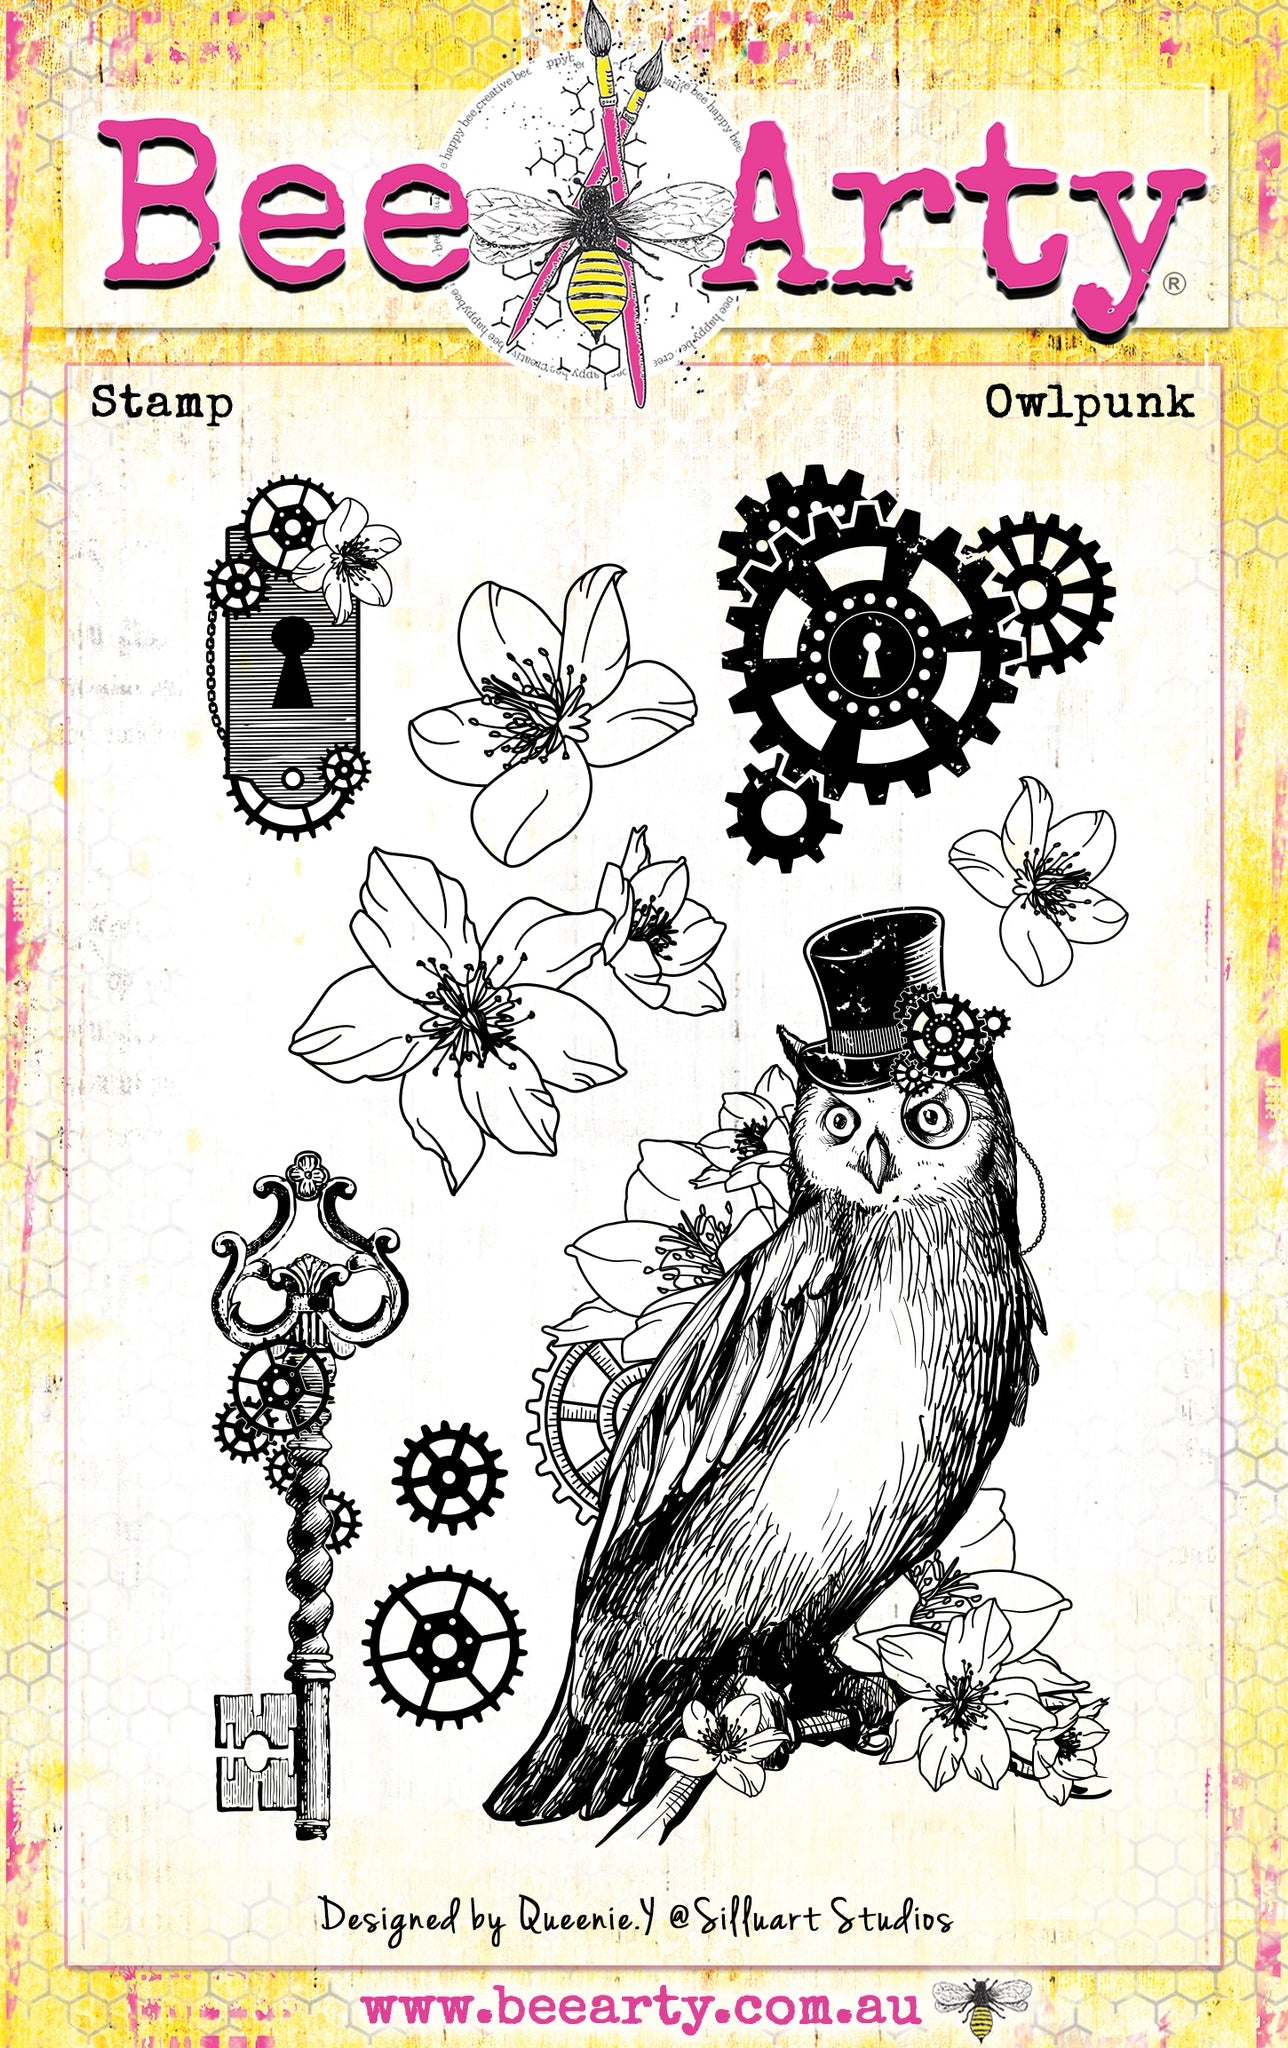 Beearty - Rustic Blossom - Owlpunk Clear Stamp